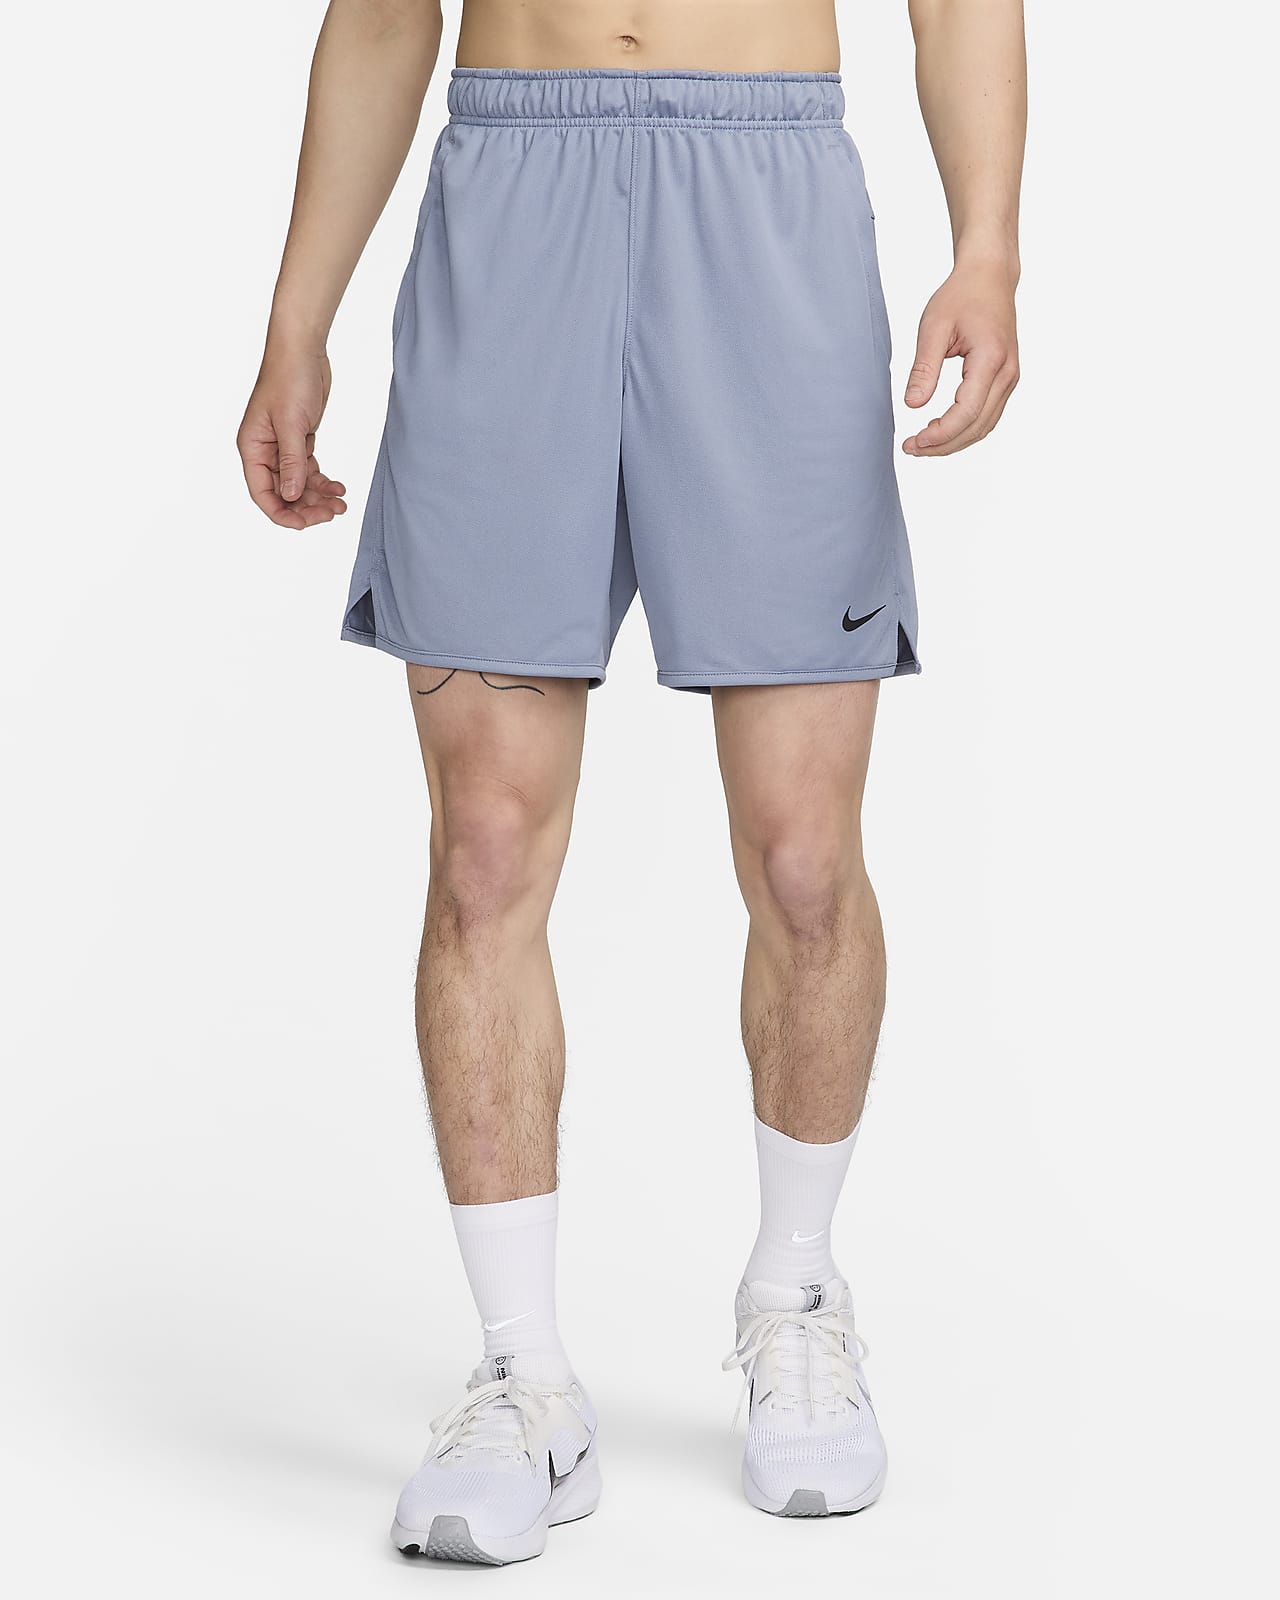 Nike Dri-FIT Totality Men's 18cm (approx.) Unlined Shorts